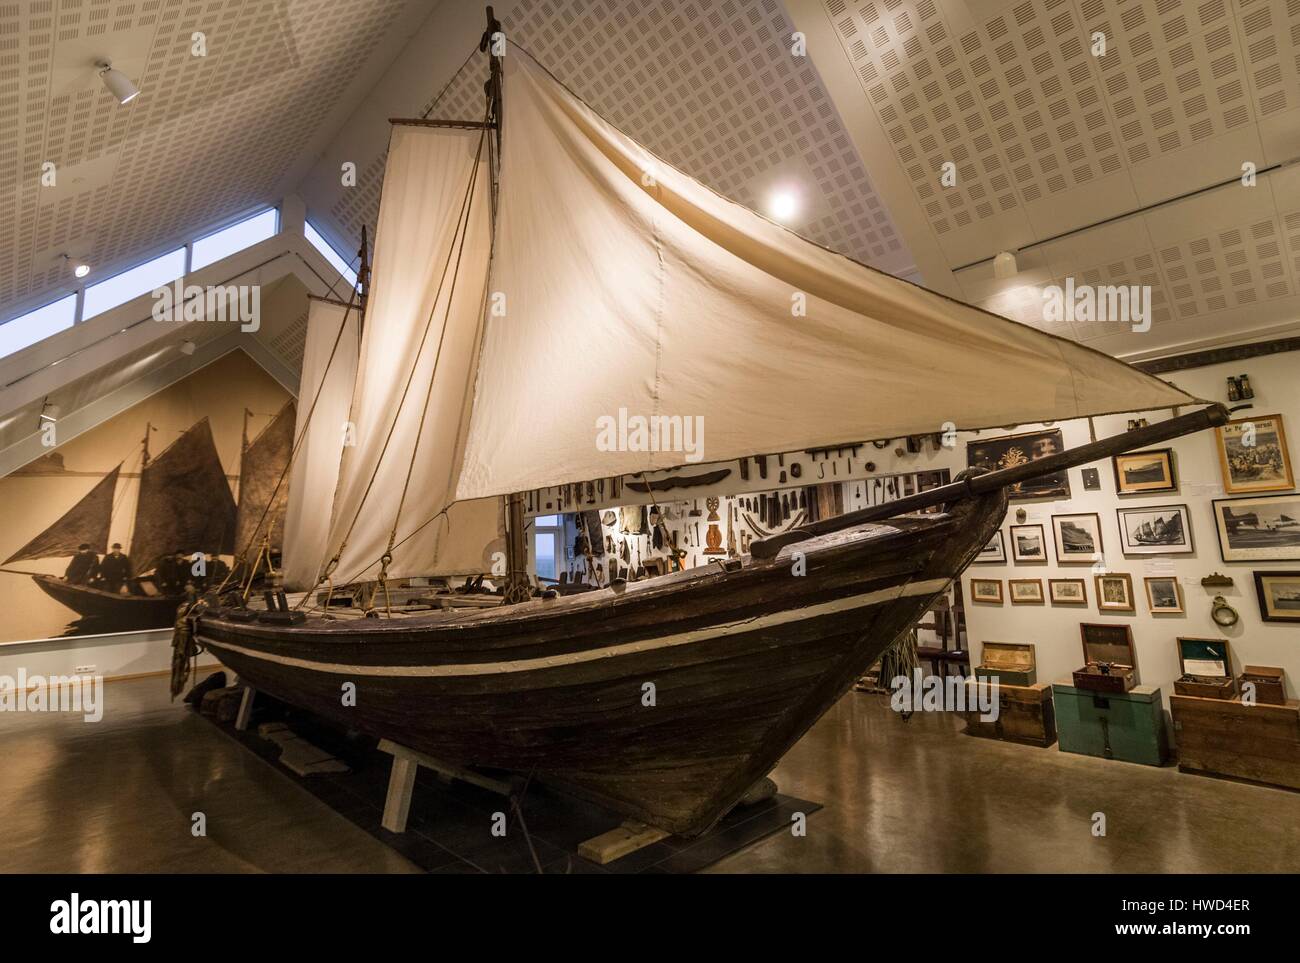 Iceland, North Atlantic, South, traditional fishing boat in the museum of Skógar, town of of the municipality of Rangárþing eystra located in Suðurland area, Pordur Tomasson collection Stock Photo